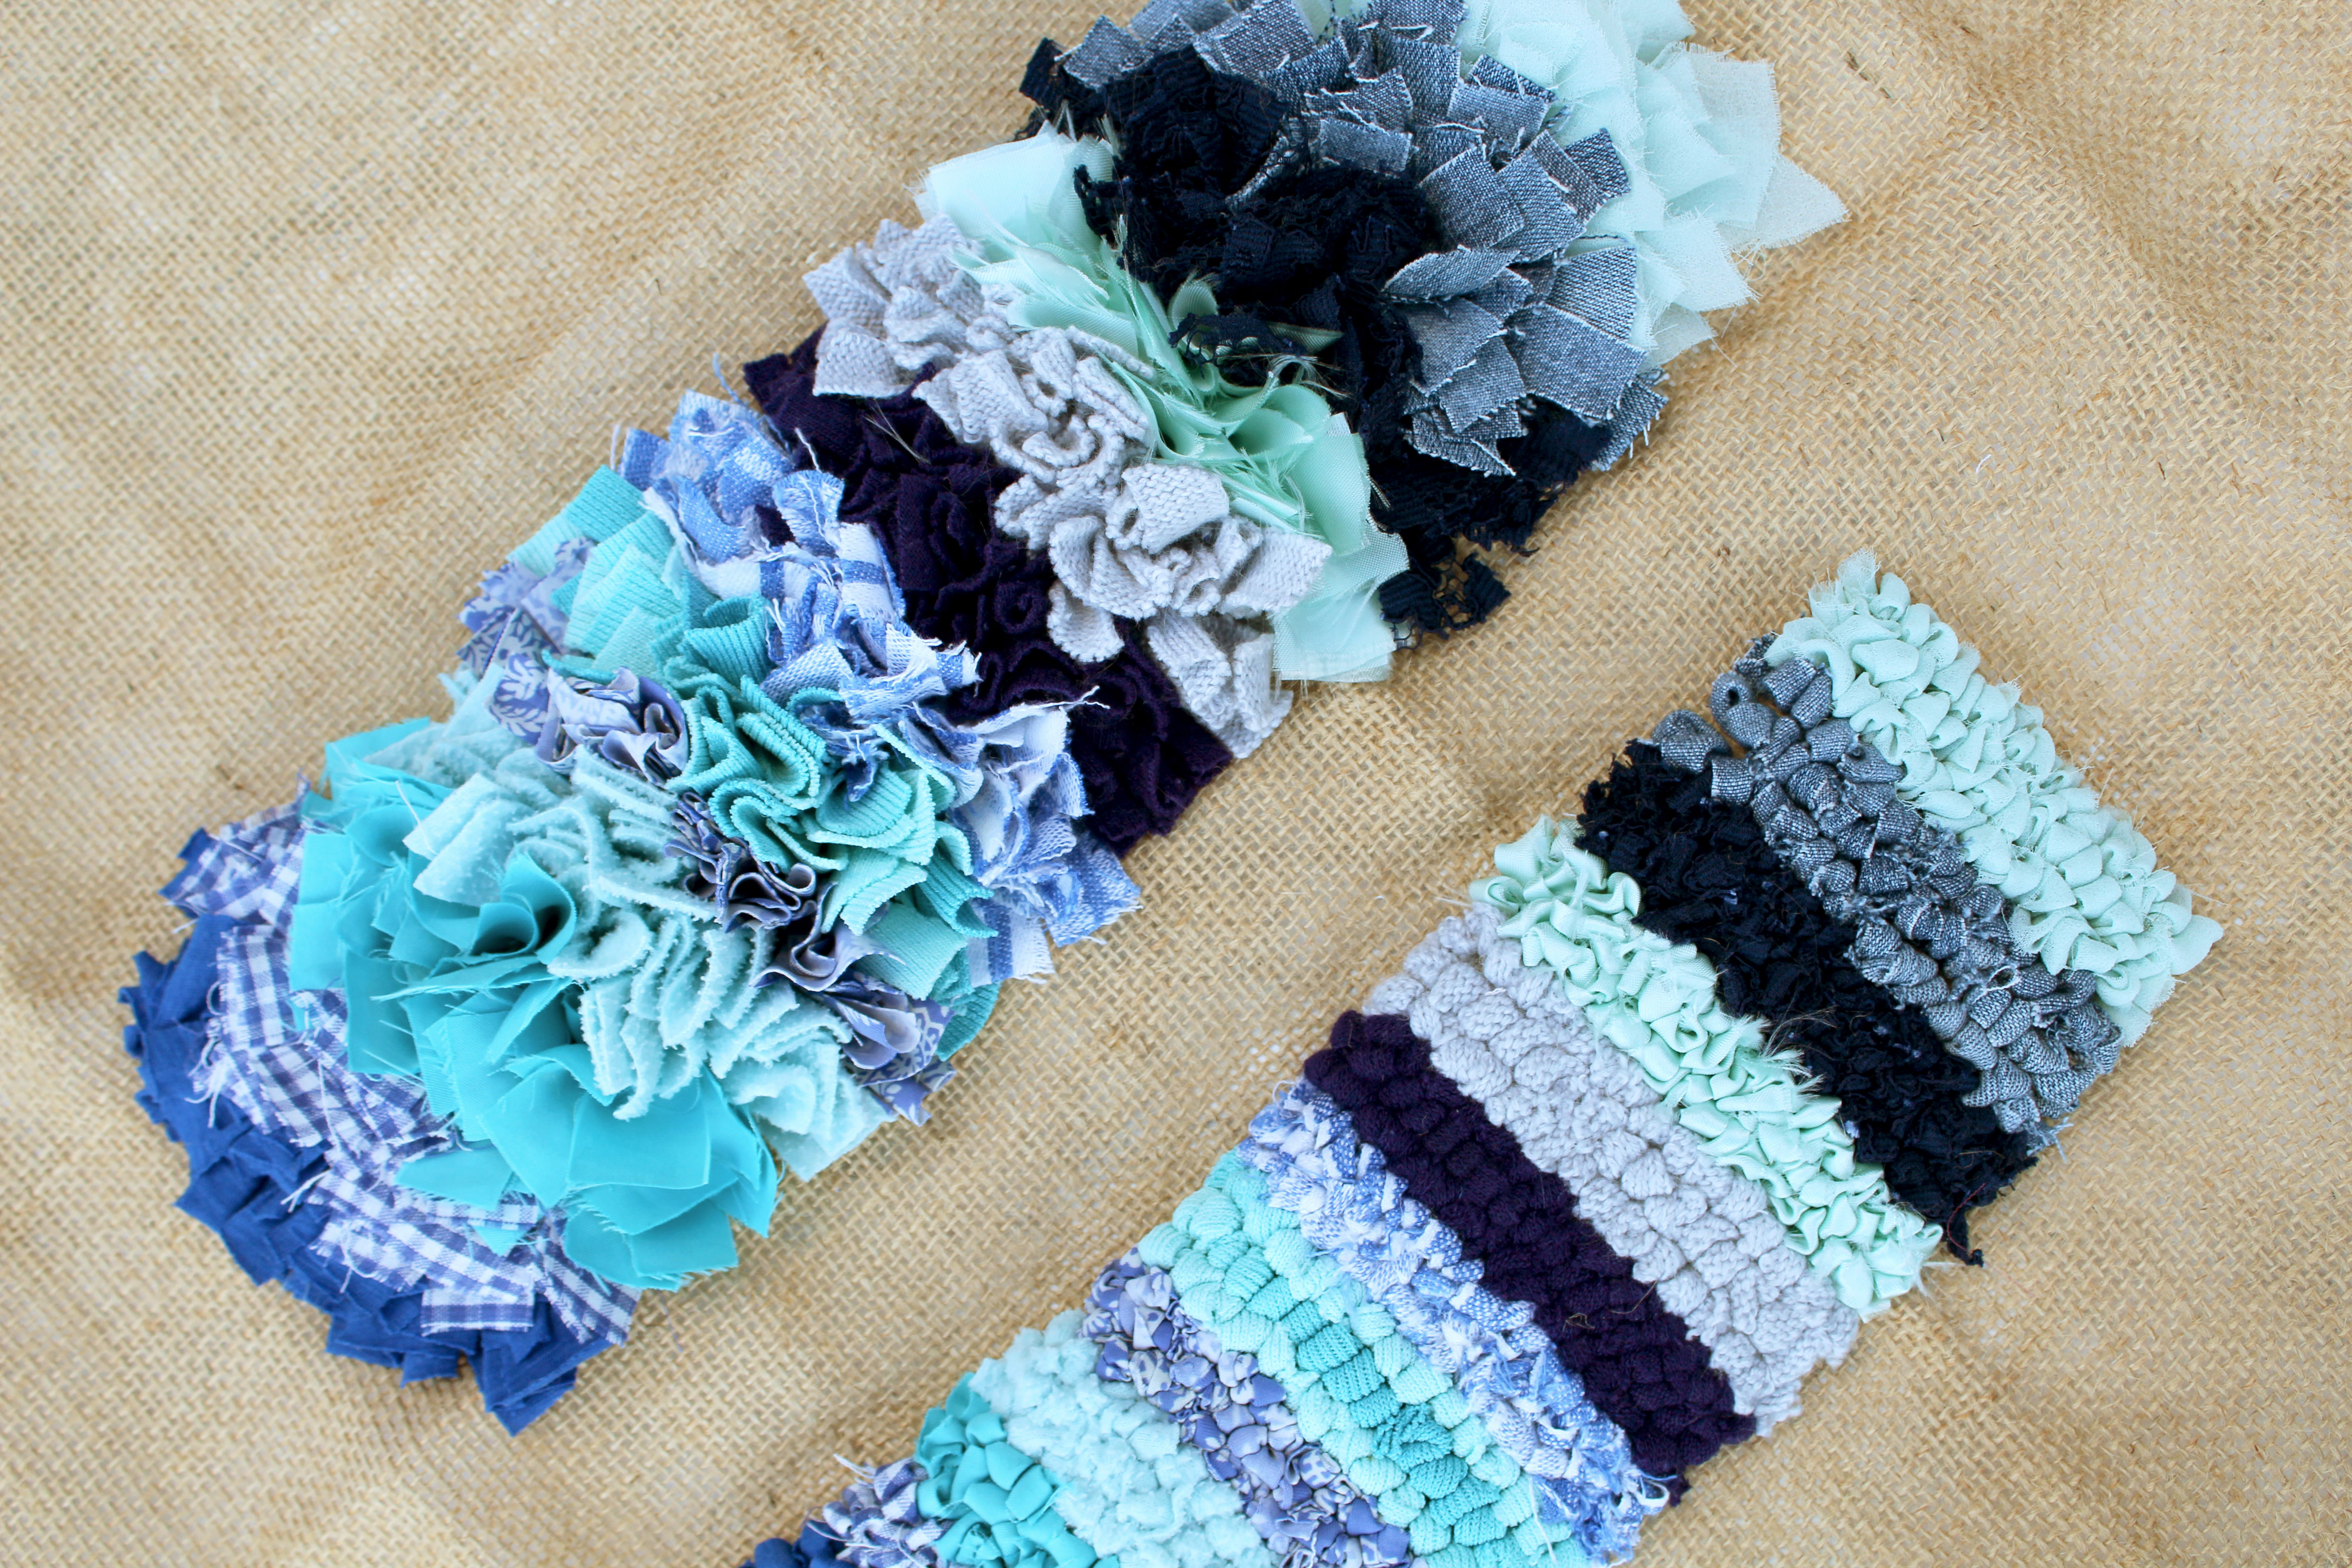 A range of different rag rug fabrics in the shaggy and loopy rag rugging techniques